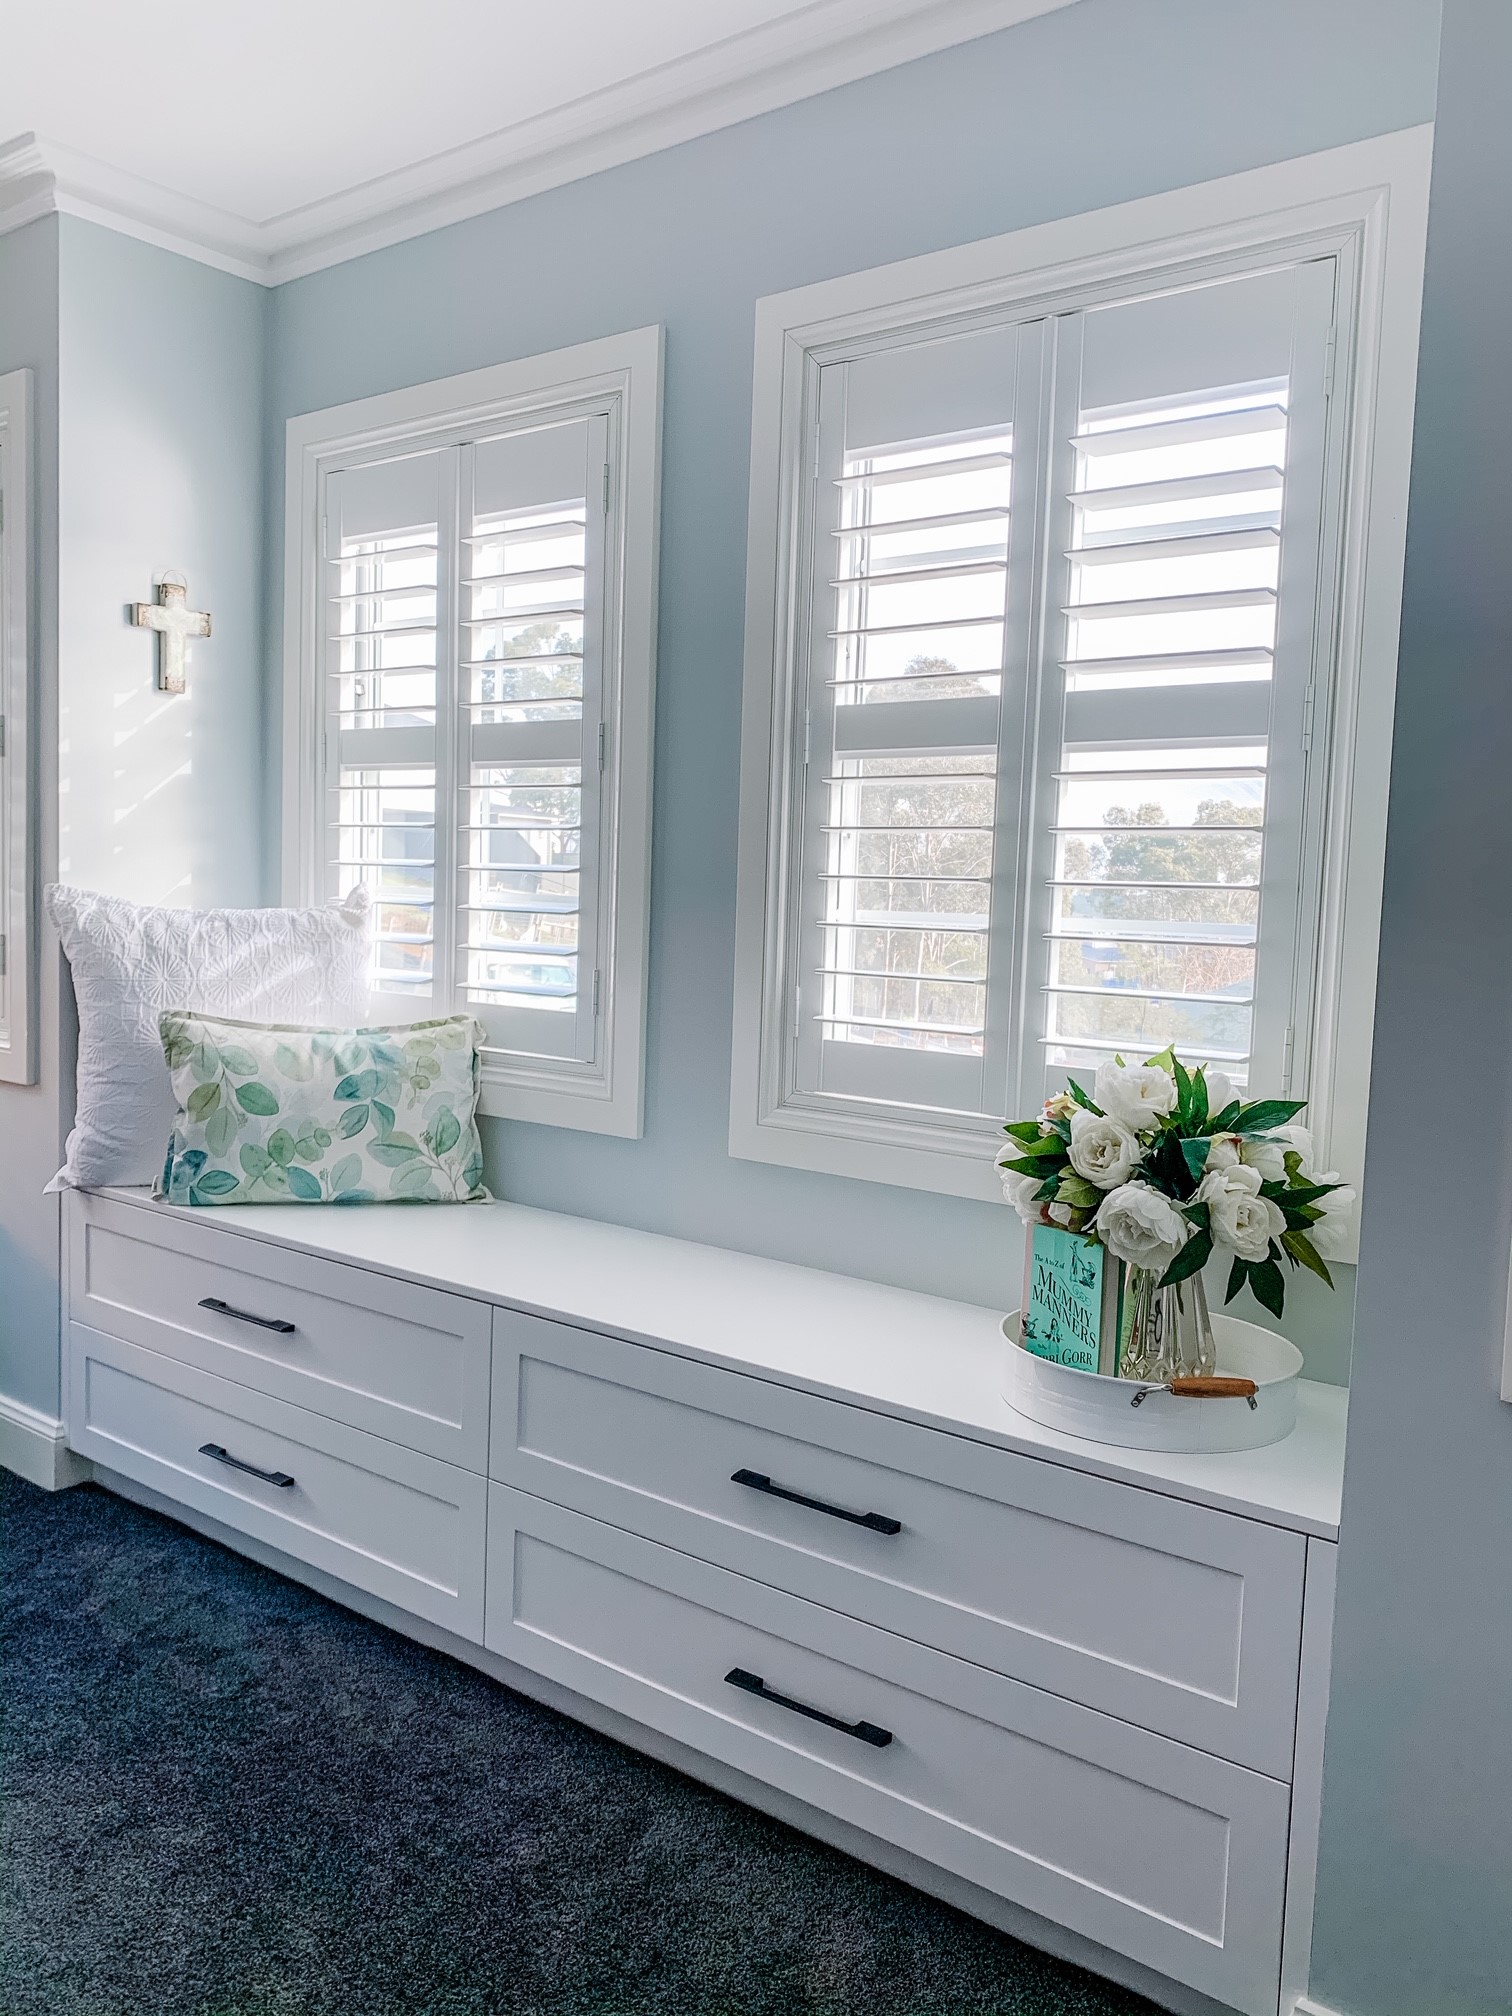 Plantation shutters in a dressing room - how to clean plantation shutters blog featured image